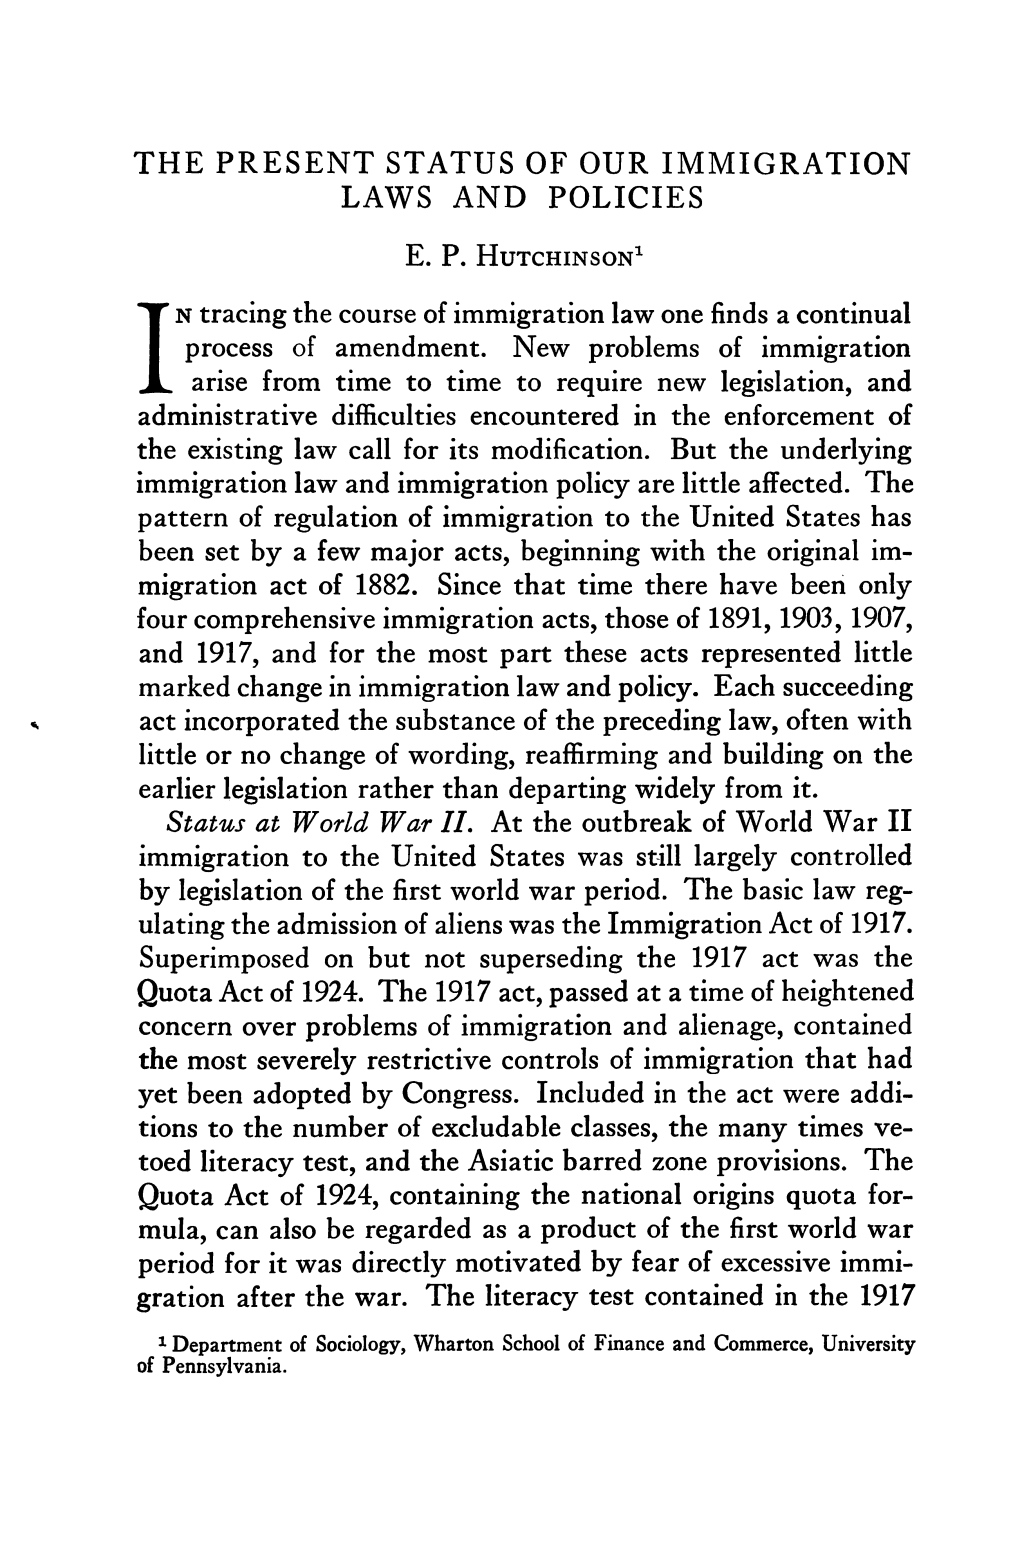 In Tracing the Course of Immigration Law One Finds a Continual